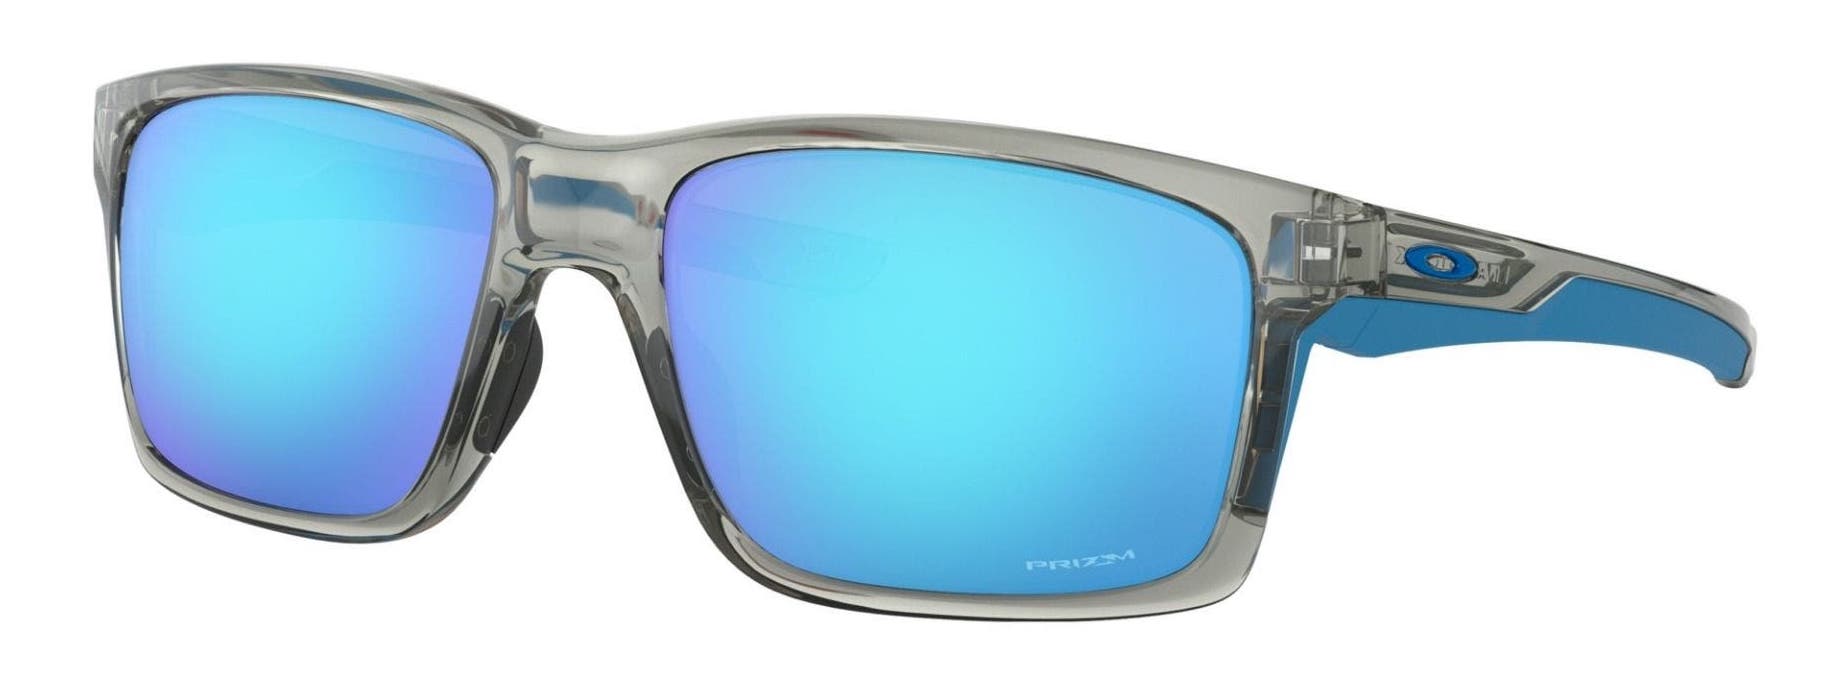 Oakley Mainlink XL golf sunglasses for big heads in grey and blue with blue PRIZM lenses.